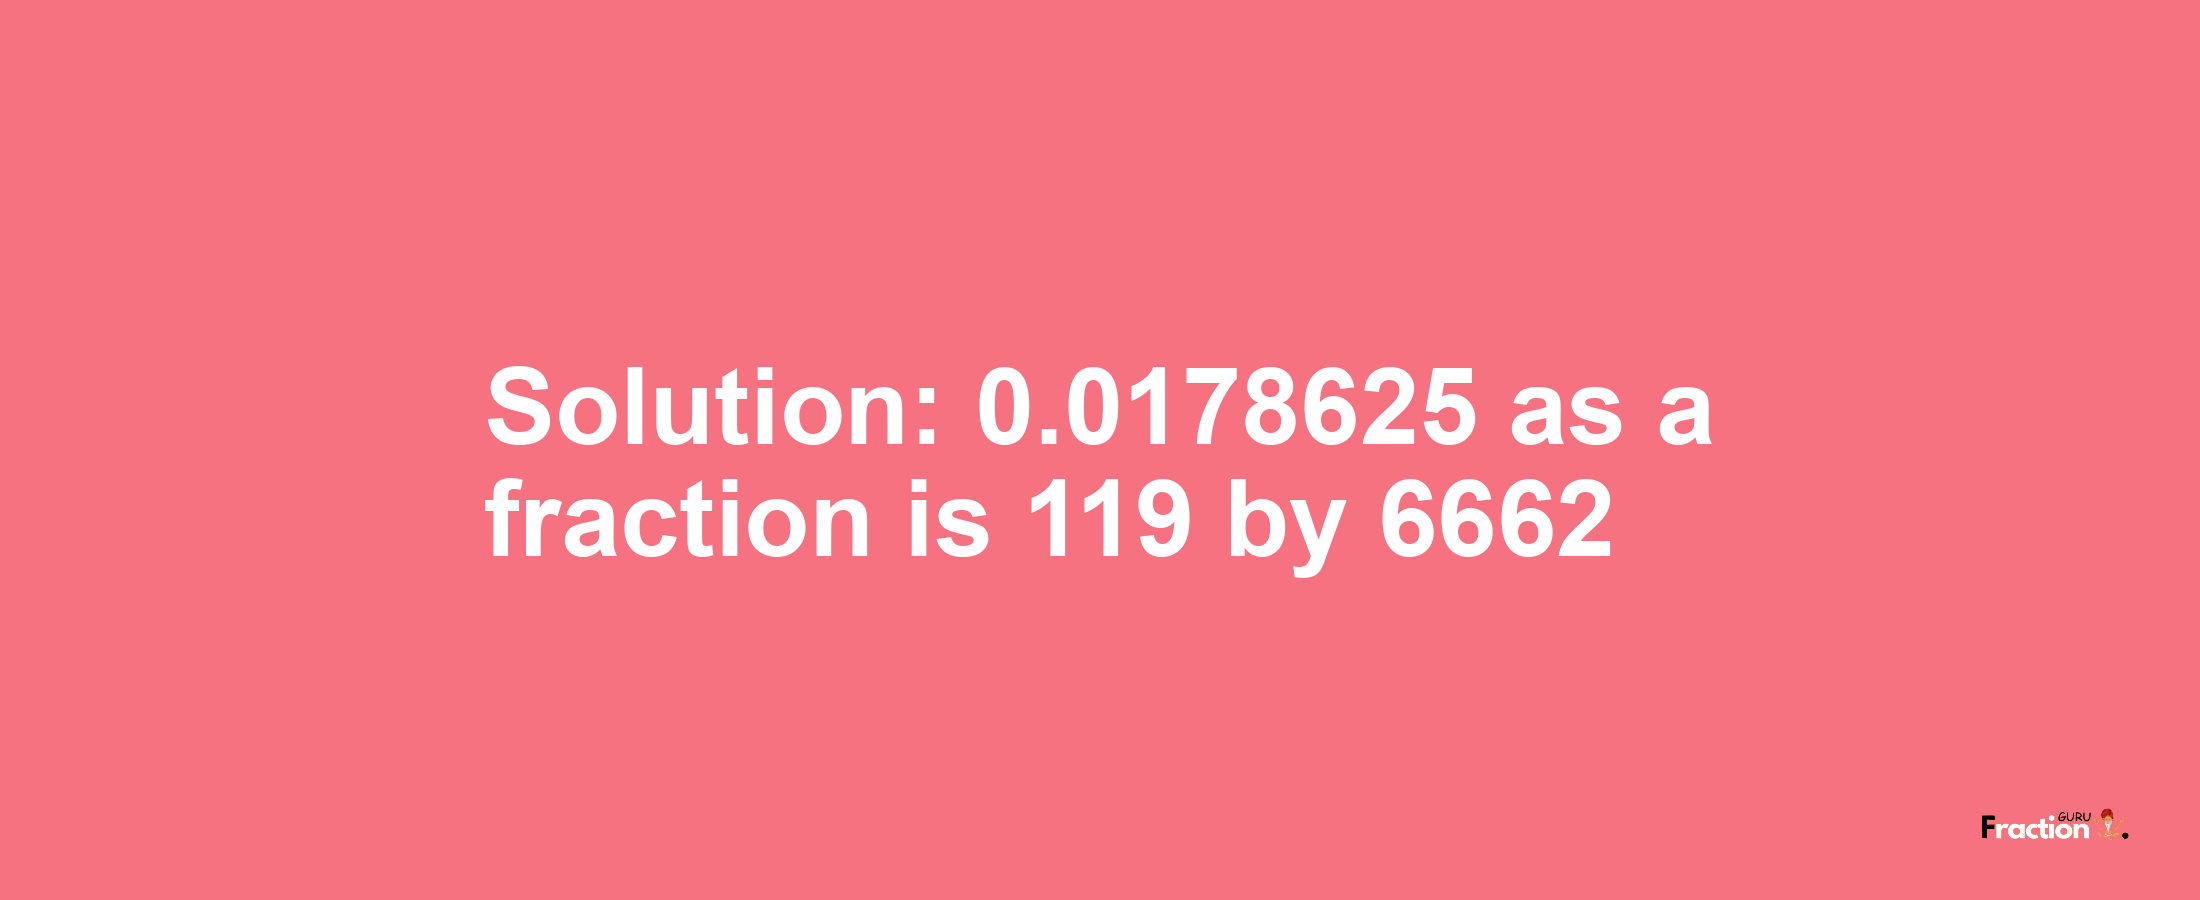 Solution:0.0178625 as a fraction is 119/6662